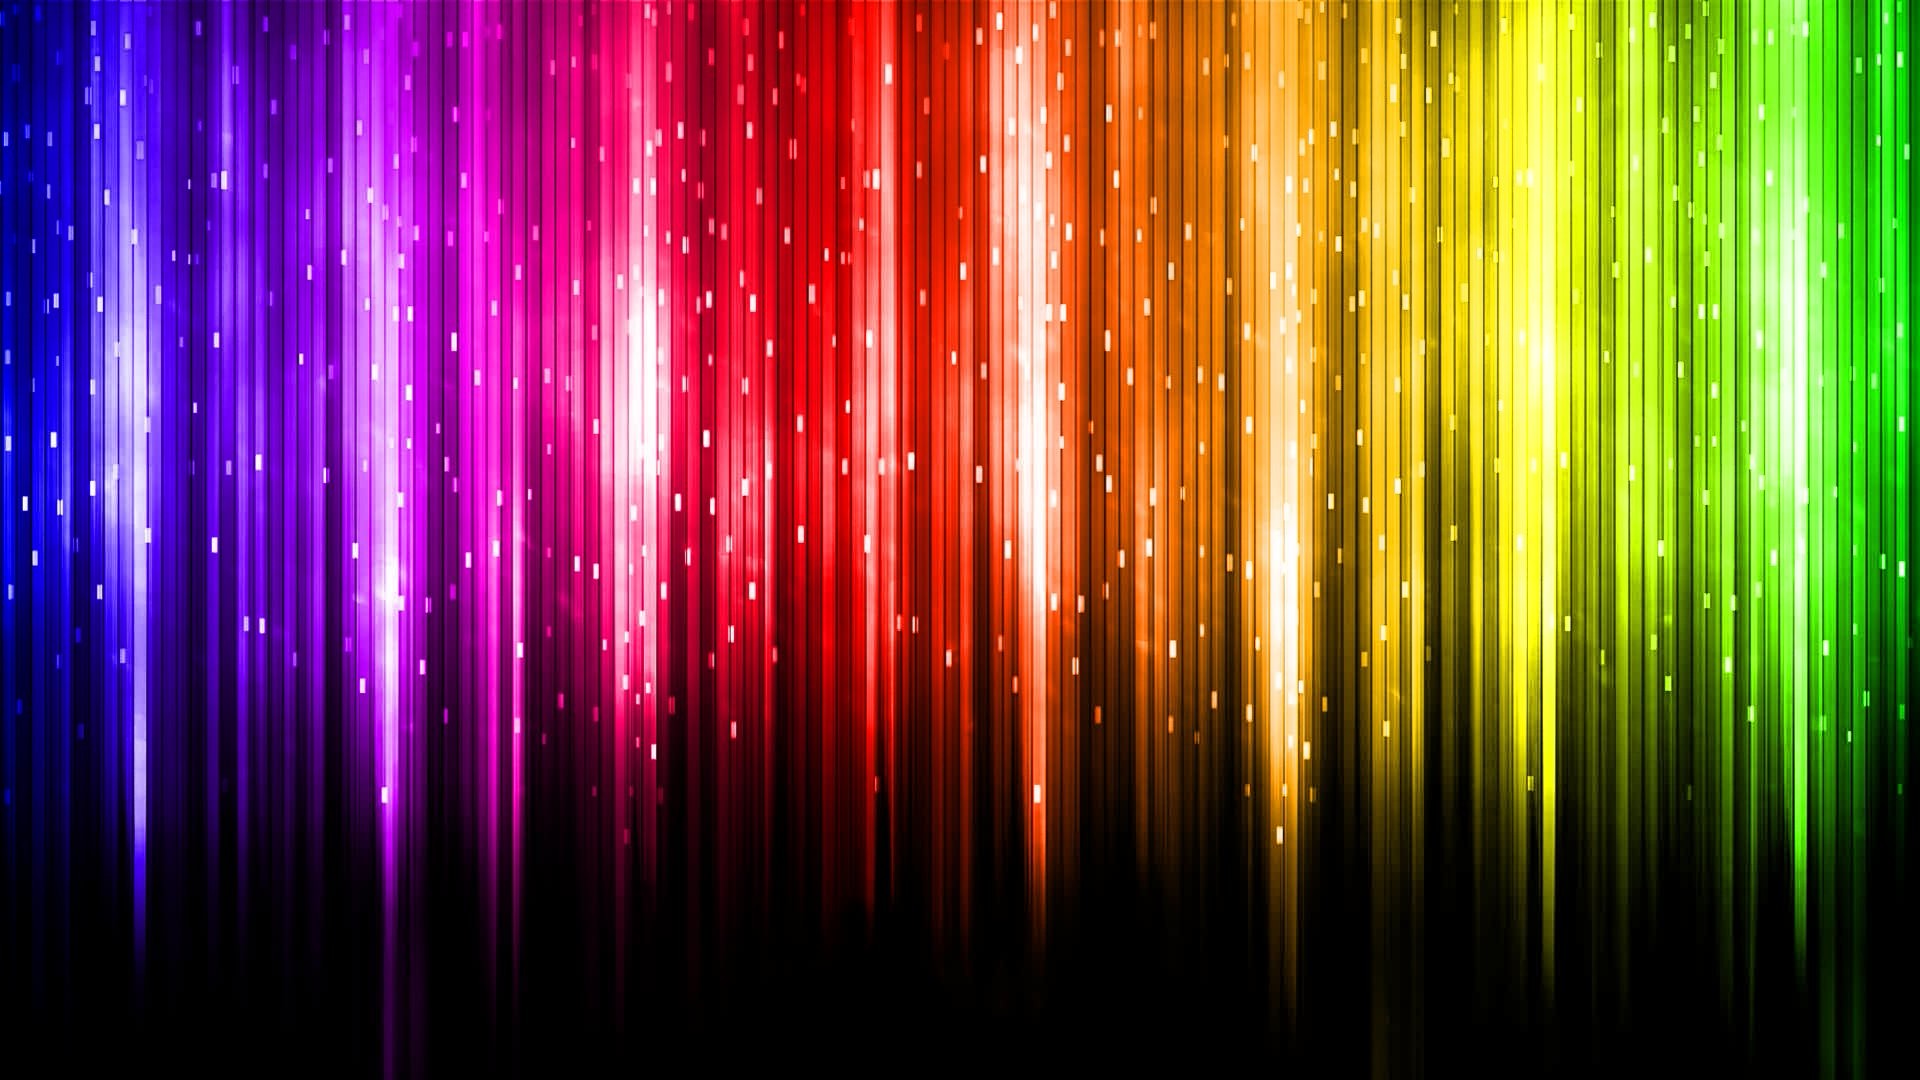 Colorful Abstract Wallpapers Hd